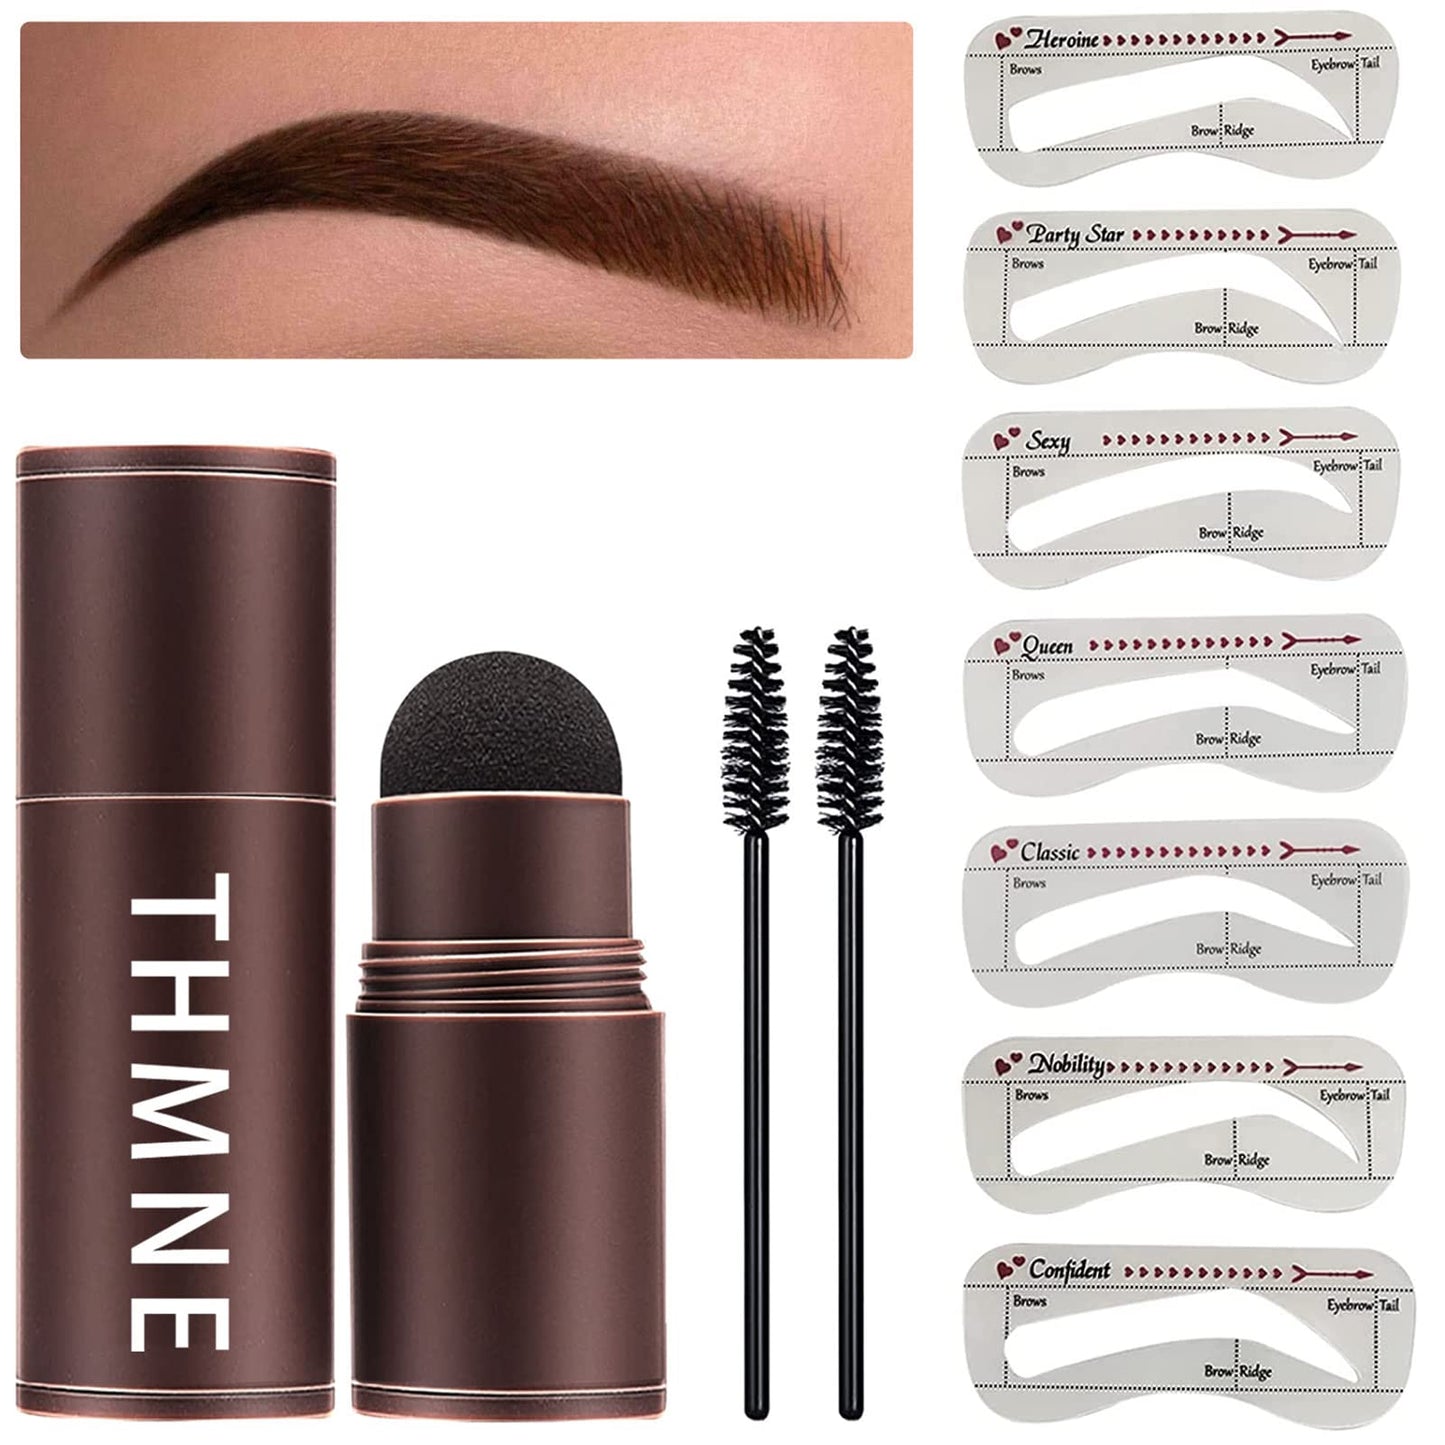 Mother's Day Special: Eyebrow Stamp and Stencil Kit for Perfect Eyebrows